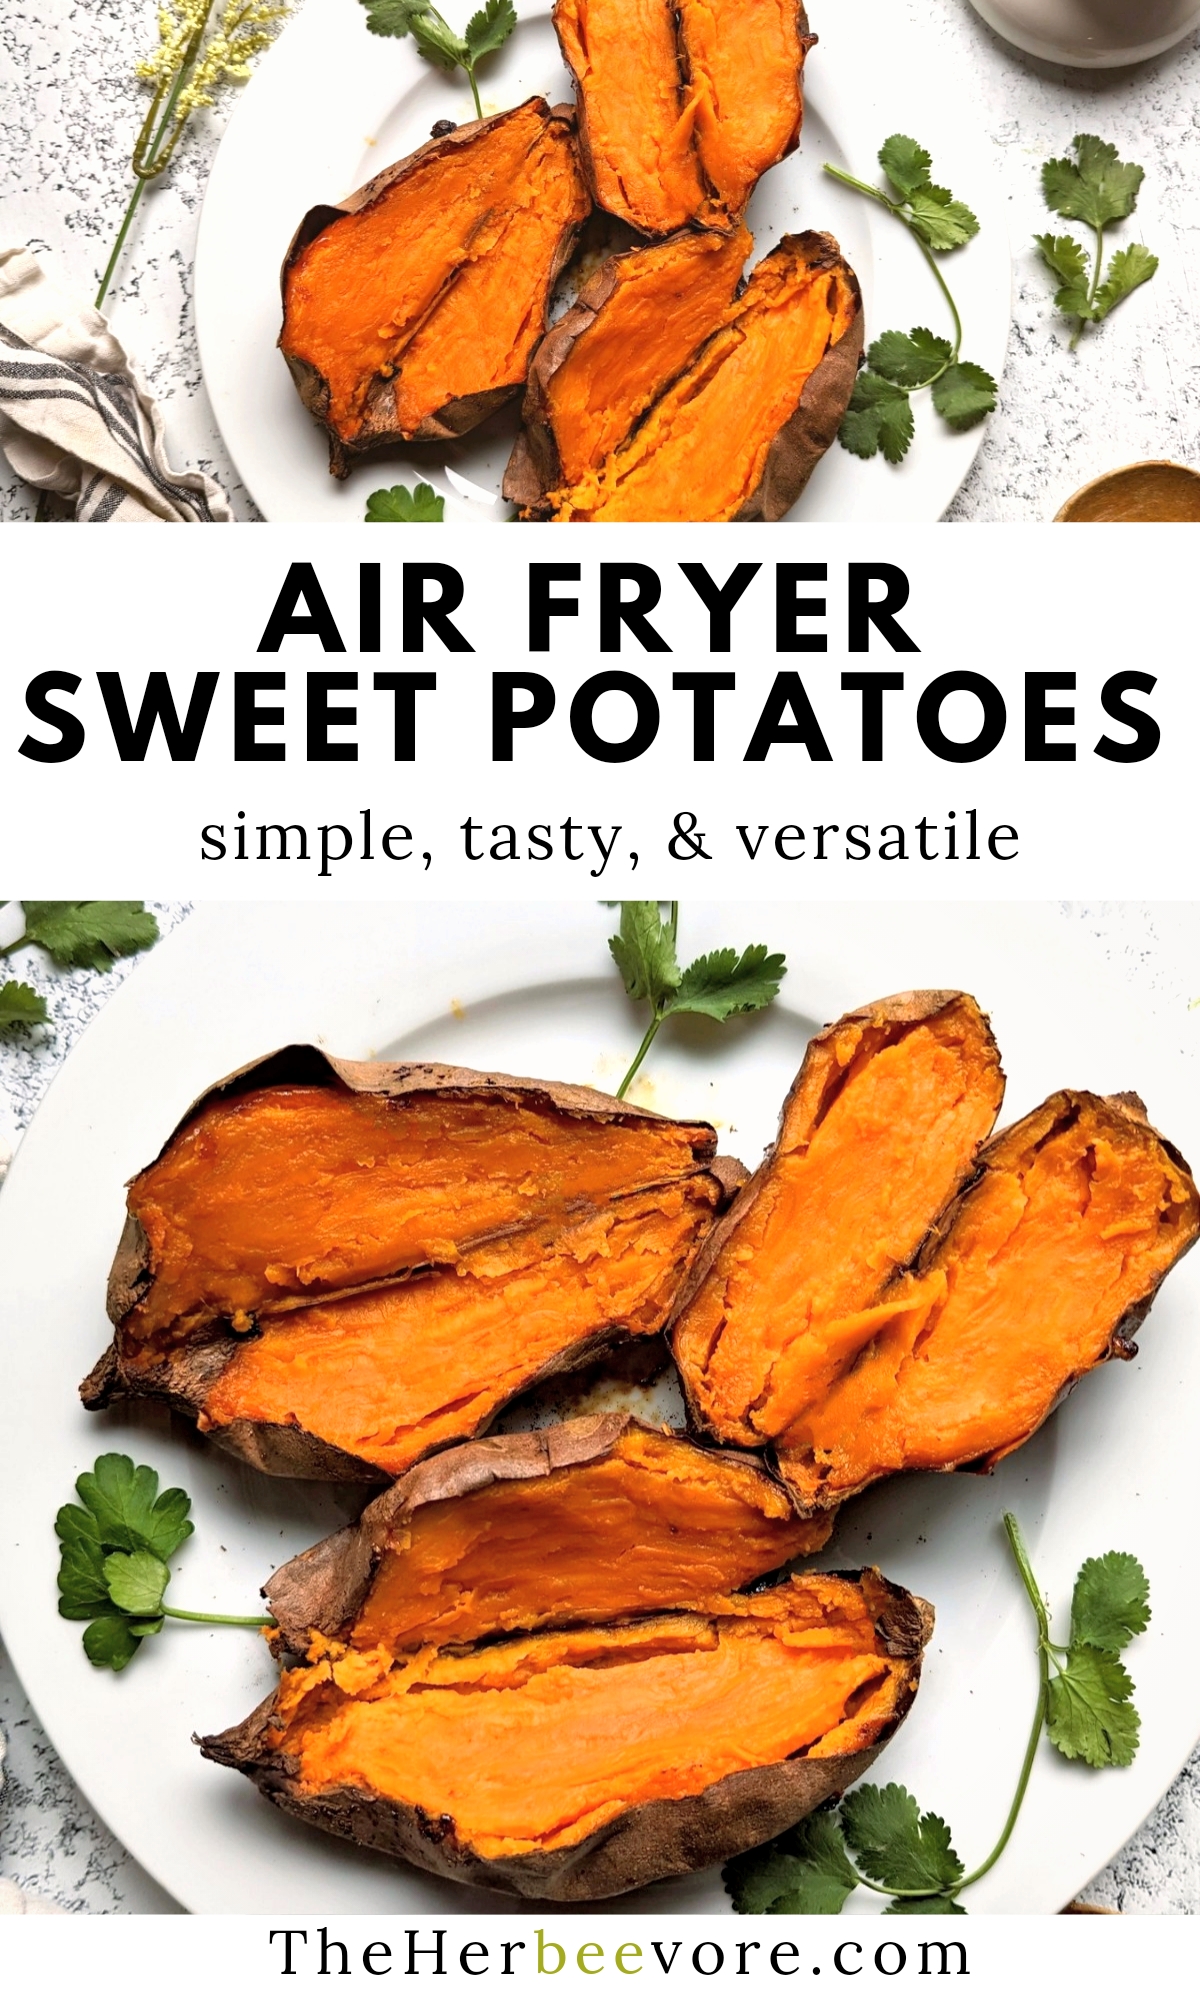 air fryer whole sweet potatoes recipe baked sweet potatoes in the air fryer